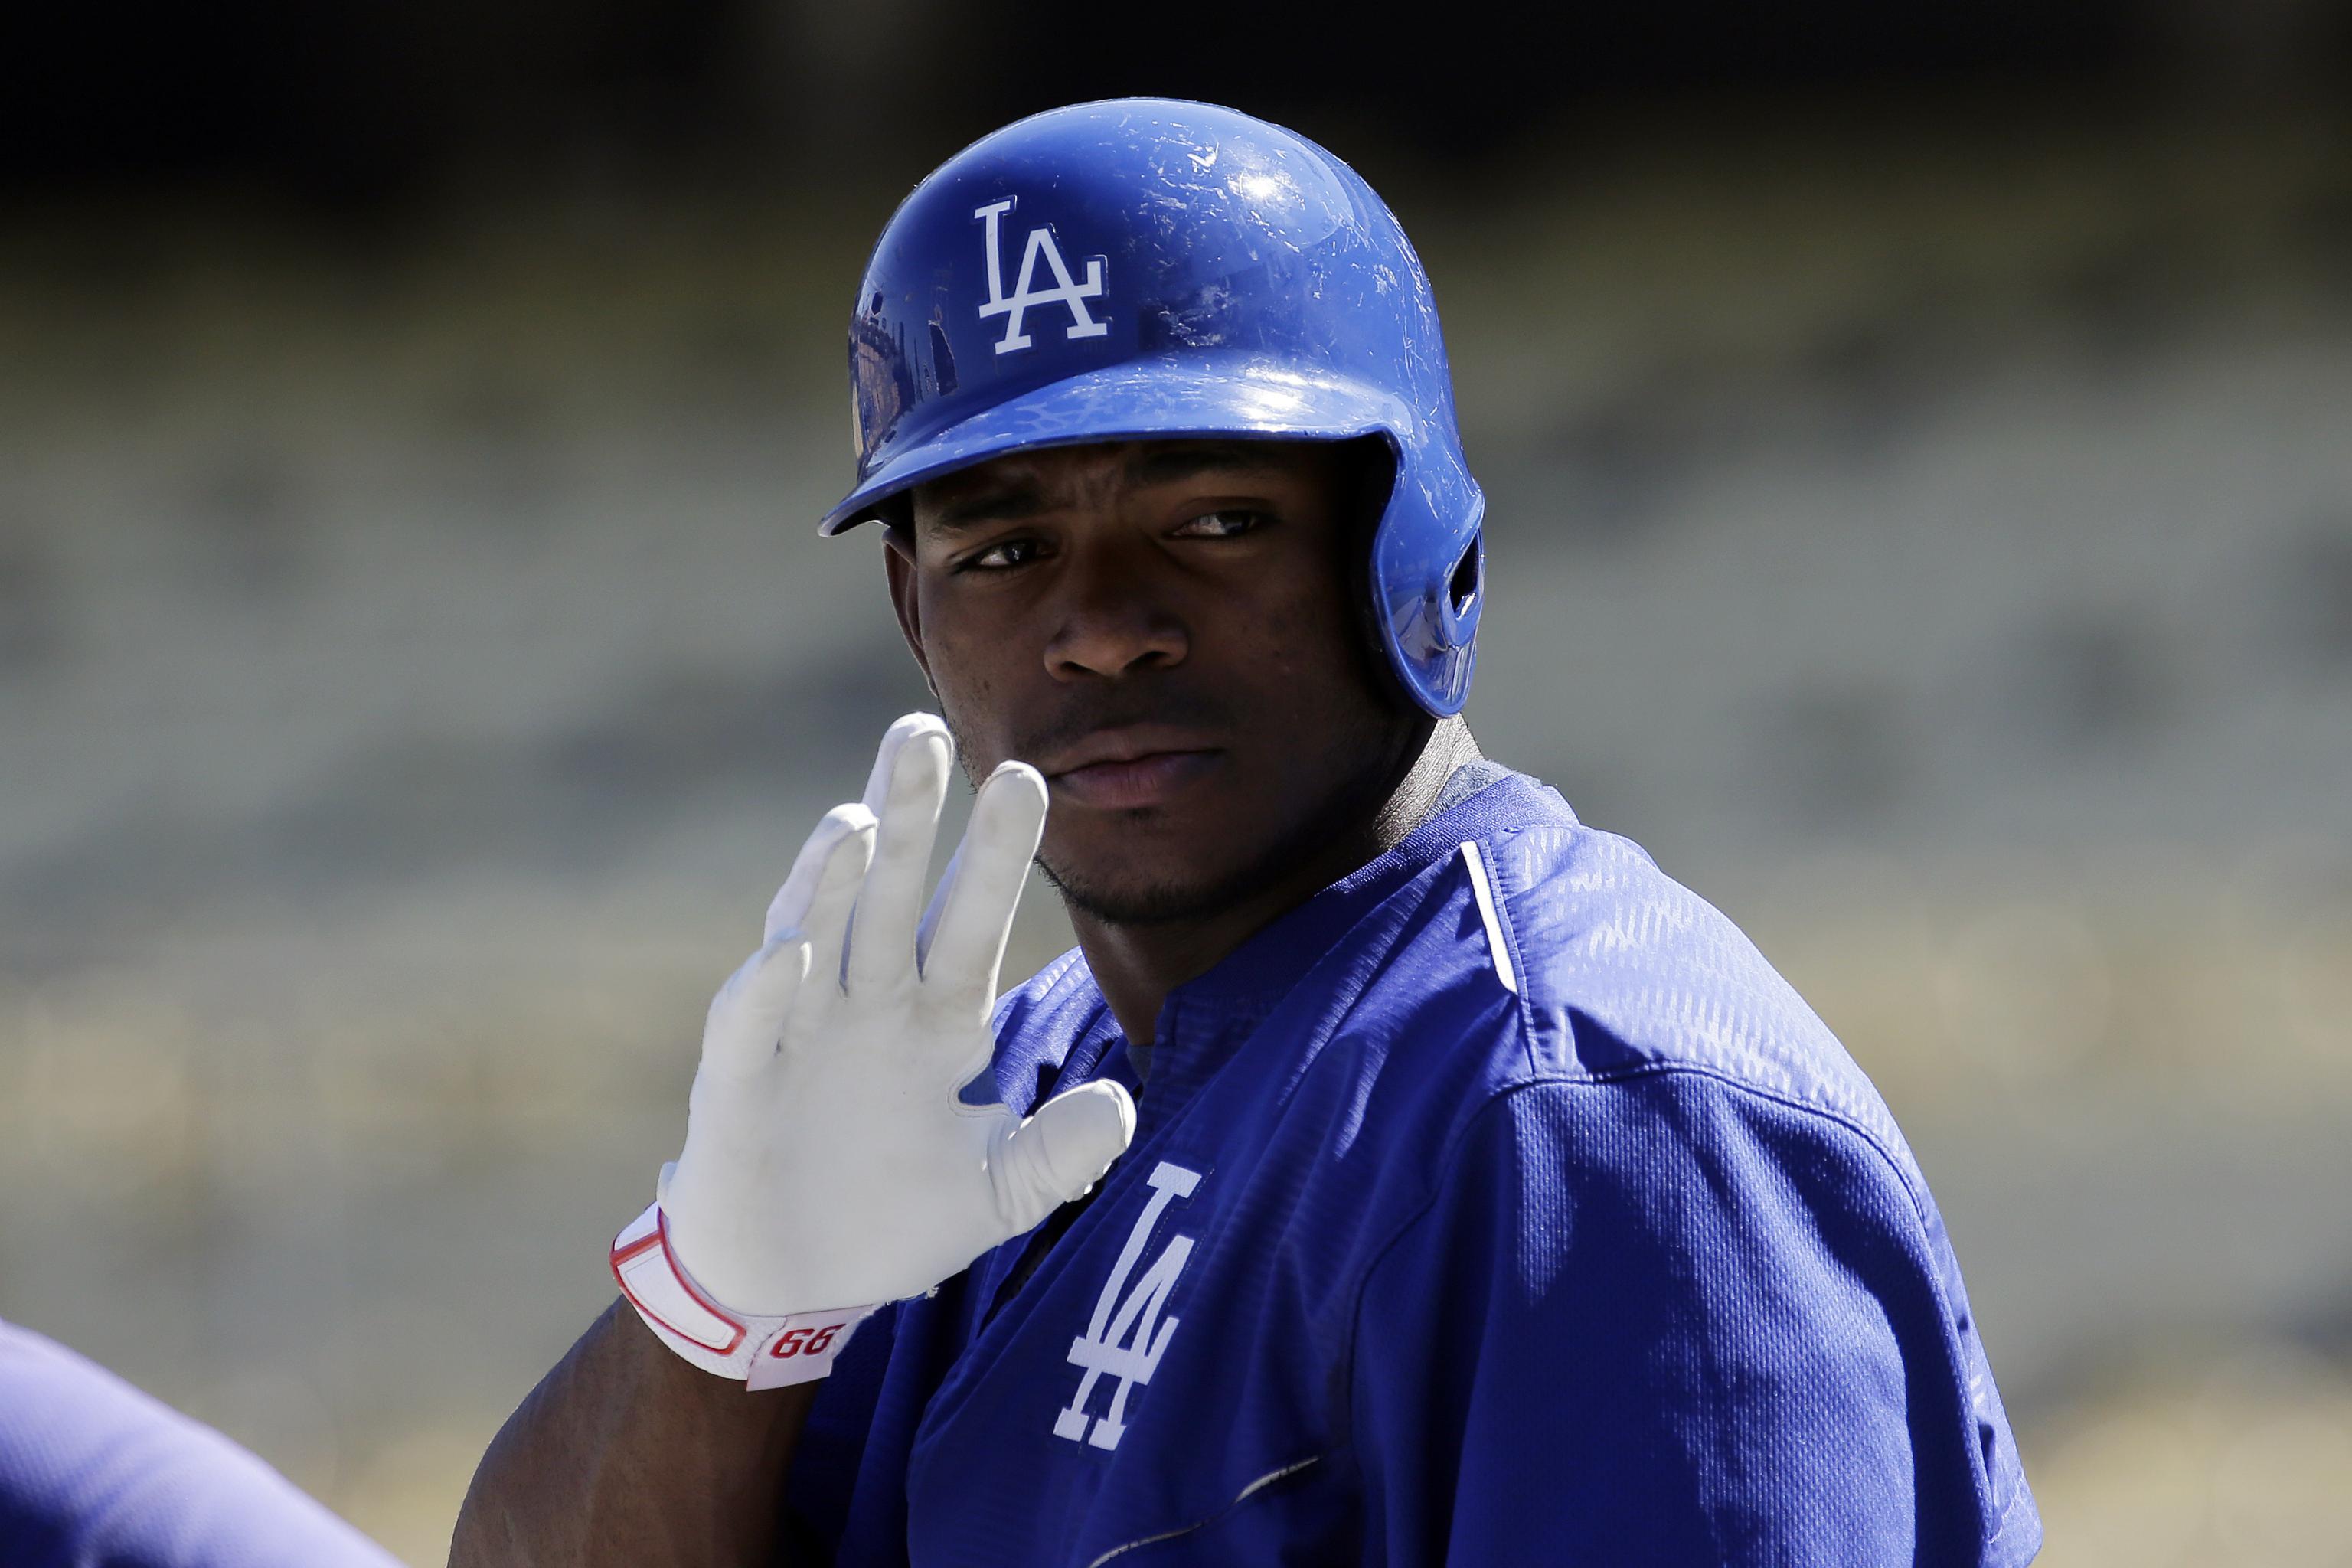 A glimpse of why the Dodgers were willing to trade Yasiel Puig